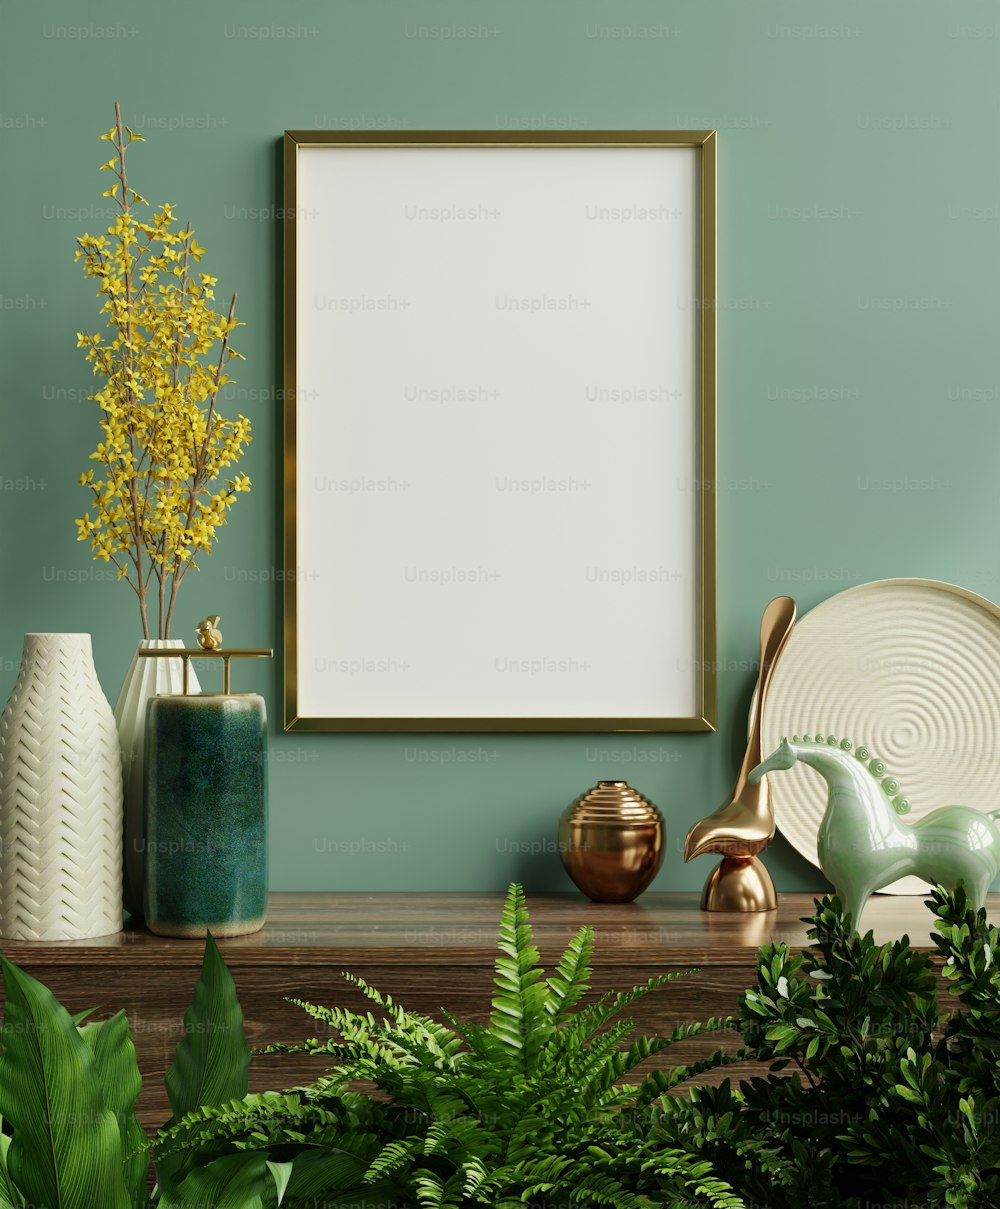 Mockup photo frame on the green shelf with beautiful plants,3d rendering